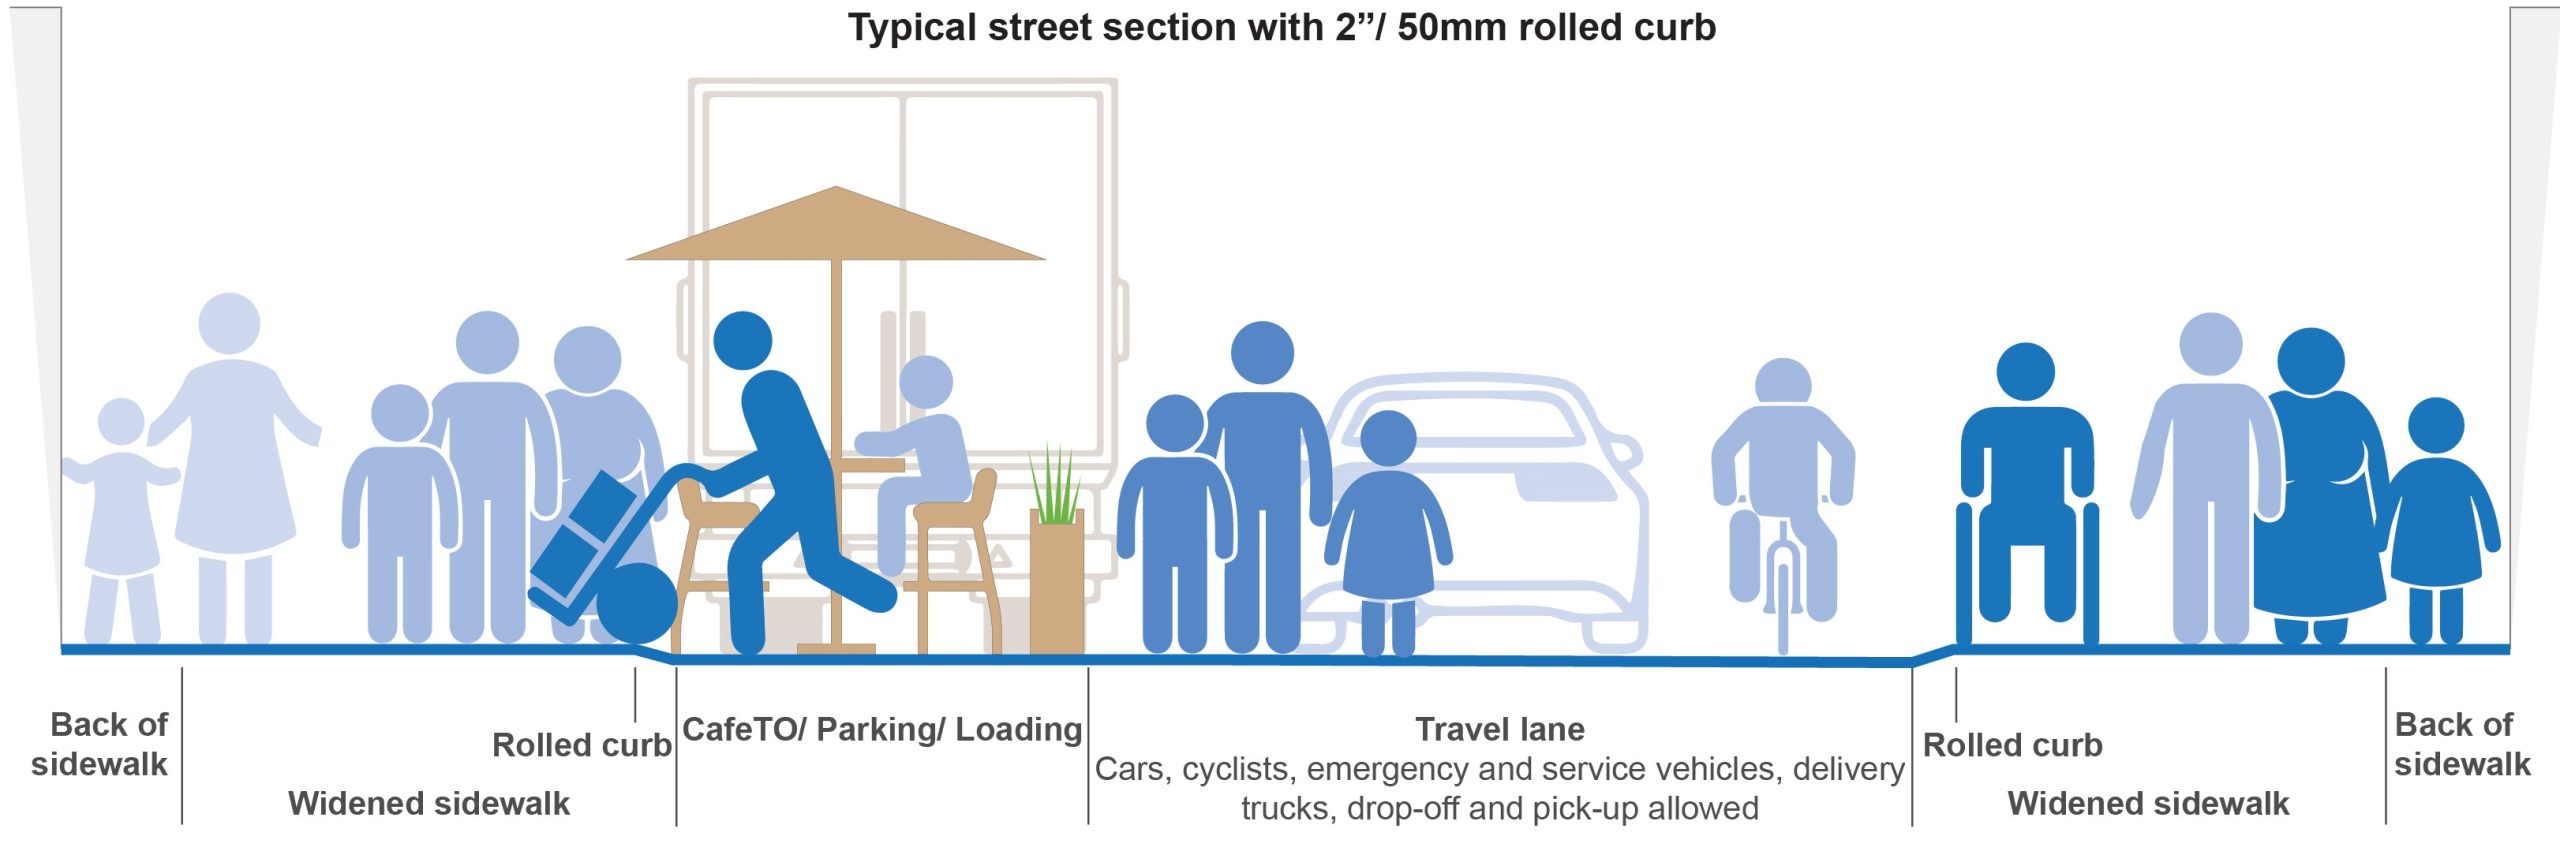 Typical street with 2" curb rolled curb. Includes widened sidewalks, CafeTO / Parking / Loading, a travel lane for cyclists, vehicles, pick and drop off. See more detailed description text below under "Recommended Design"